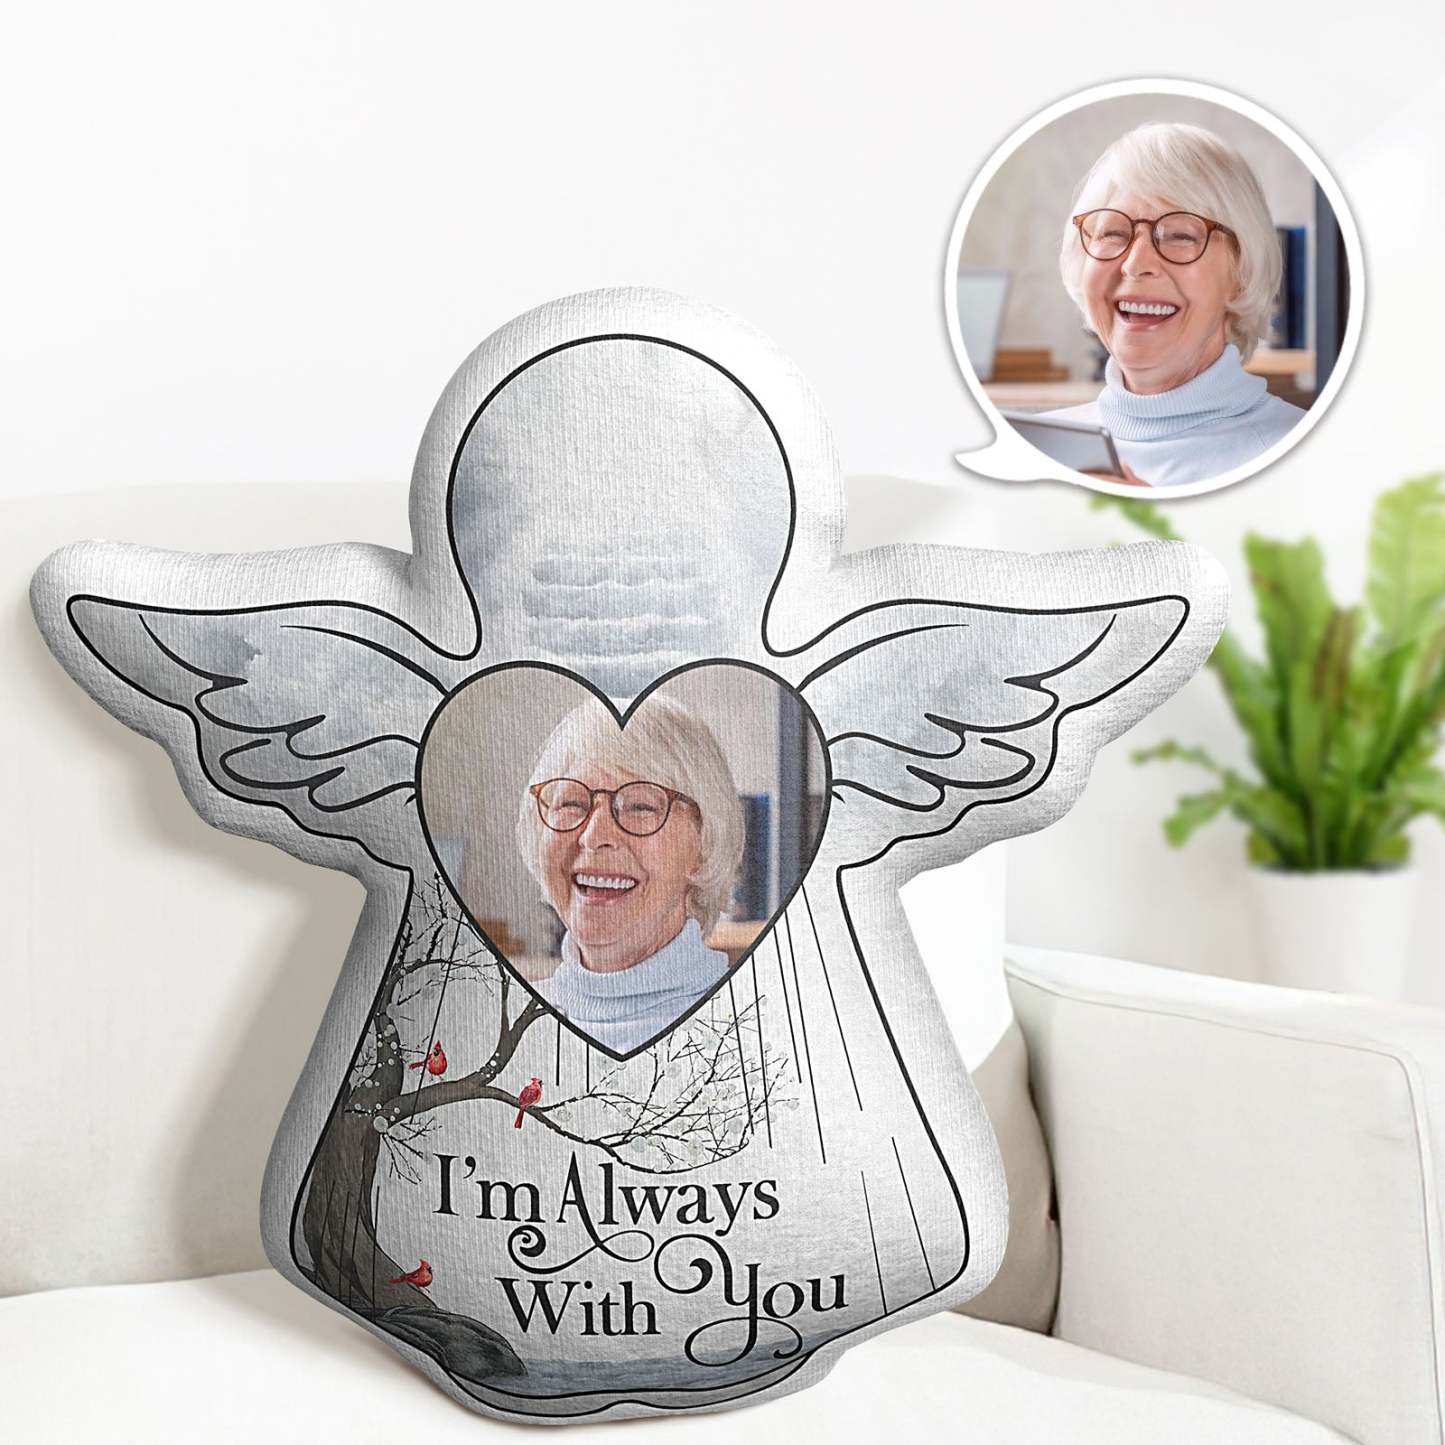 Custom Photo Pillow I'm Always With You Memorial Gift For Family, Friends Personalized Pillow - auphotoblanket